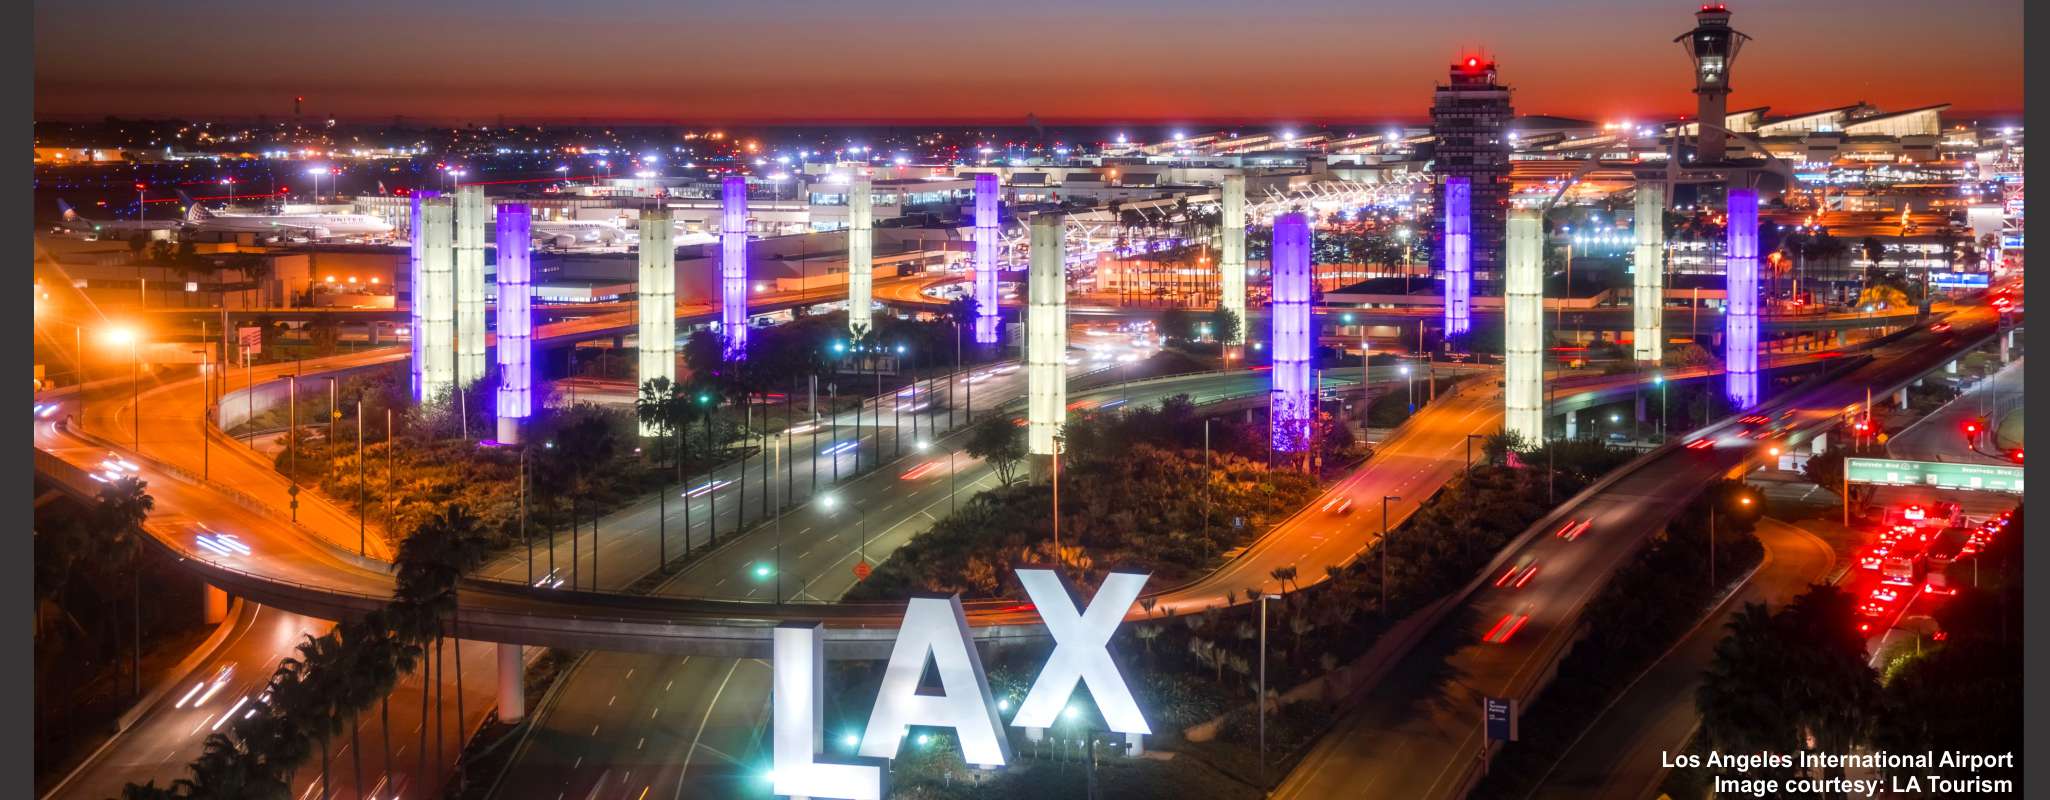 LAX - Los Angeles Airport image